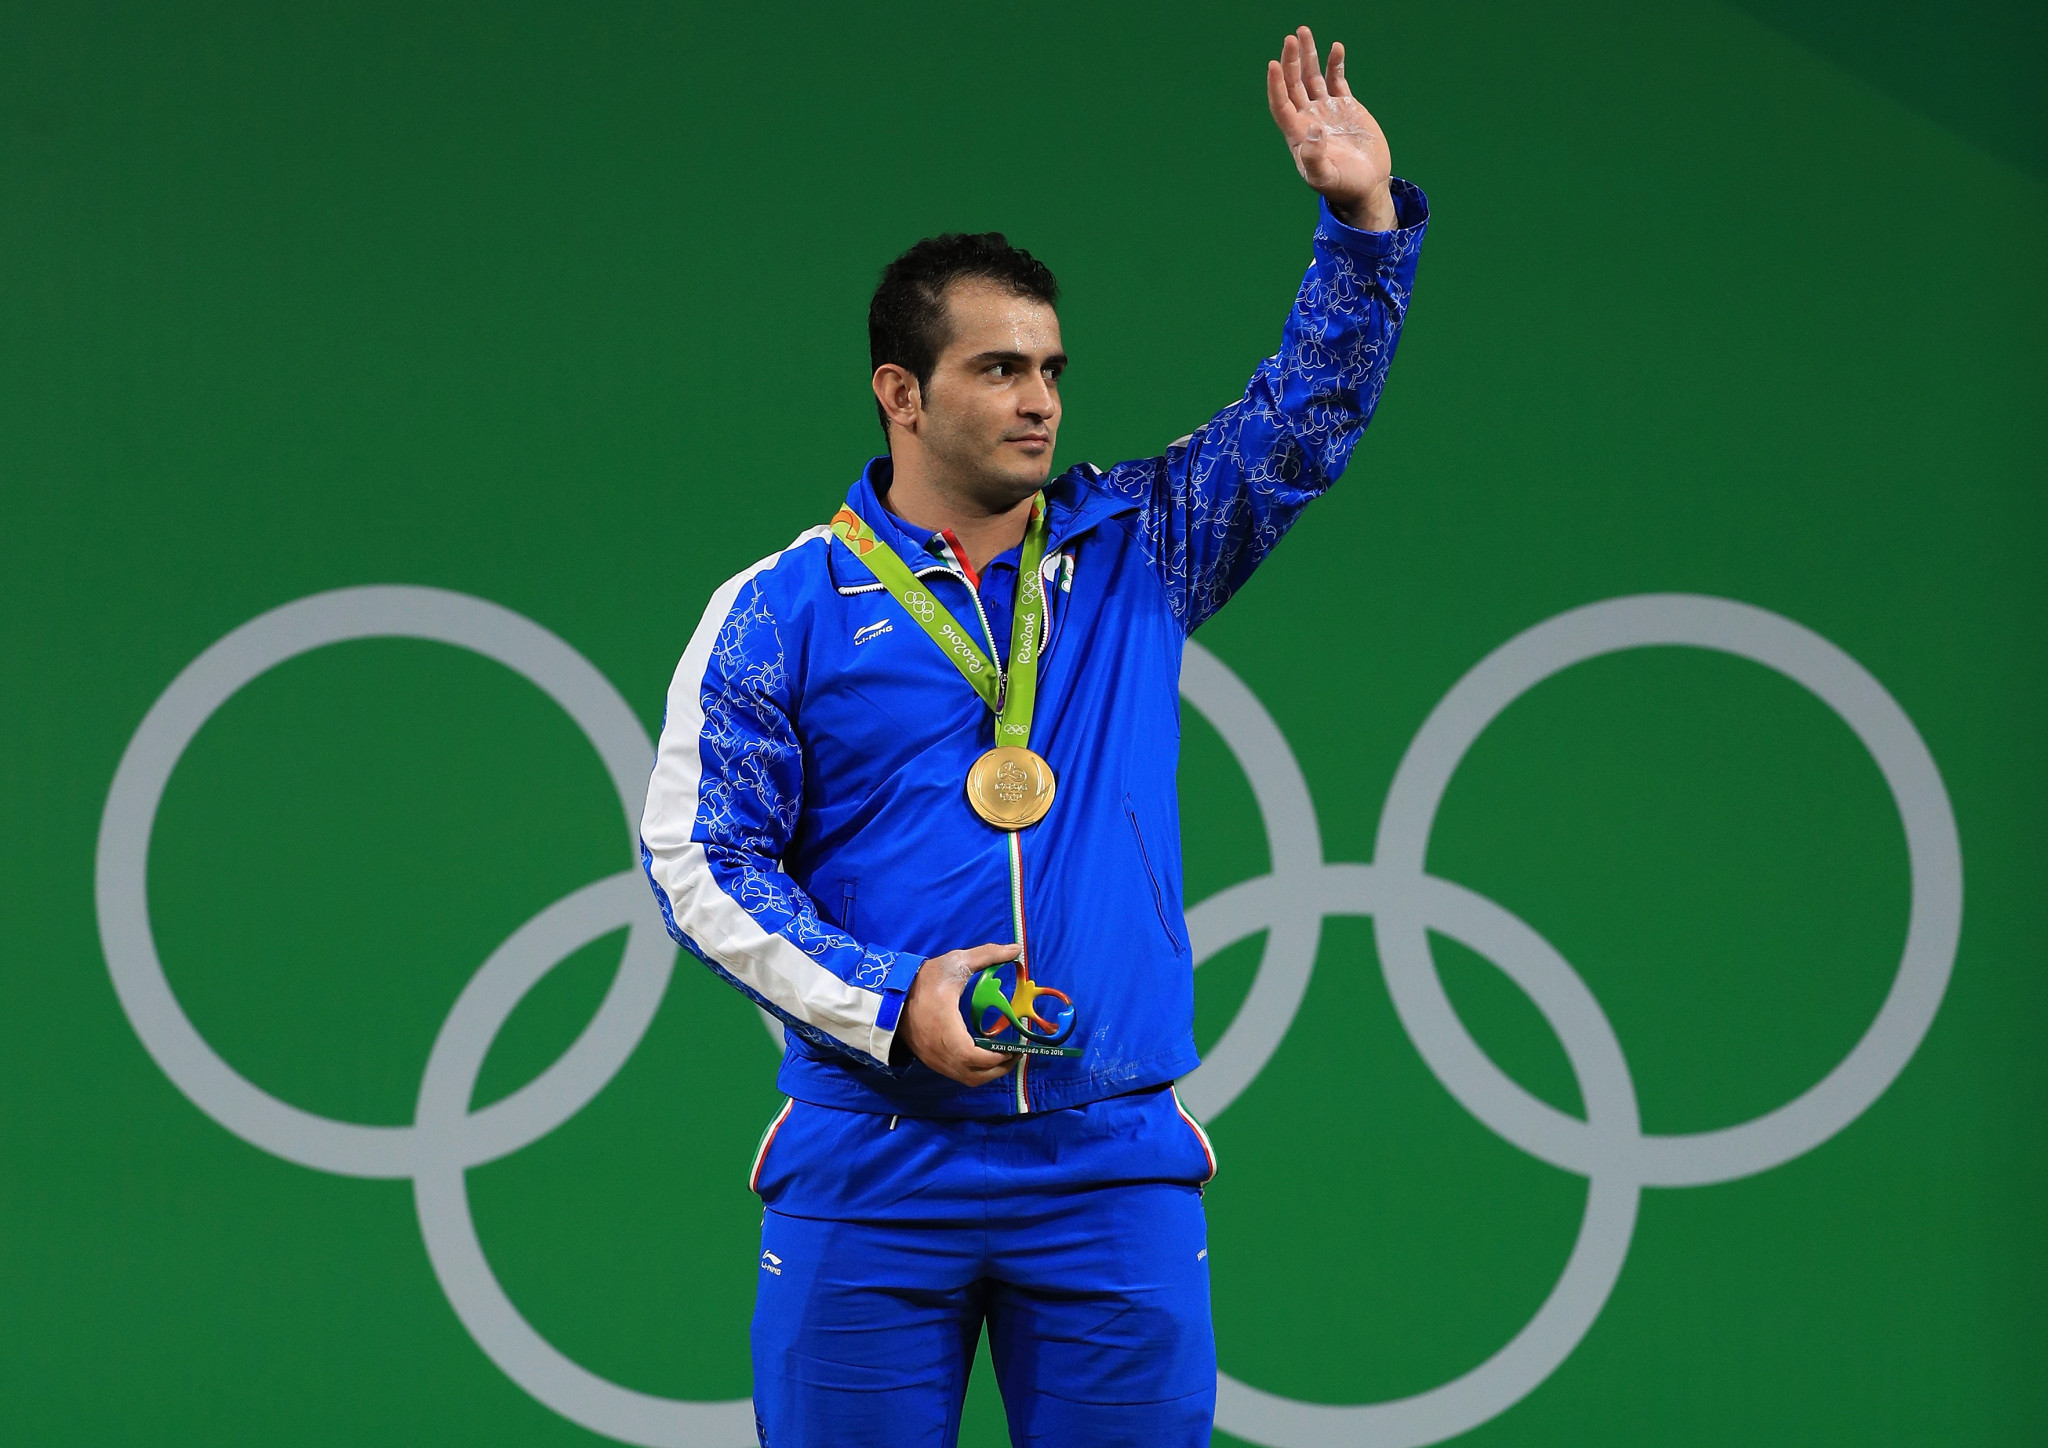 Iran's Sohrab Moradi, who won Olympic gold at Rio 2016 before an injury-hit career, is returning with the goal of qualifying for Paris 2024 ©Getty Images